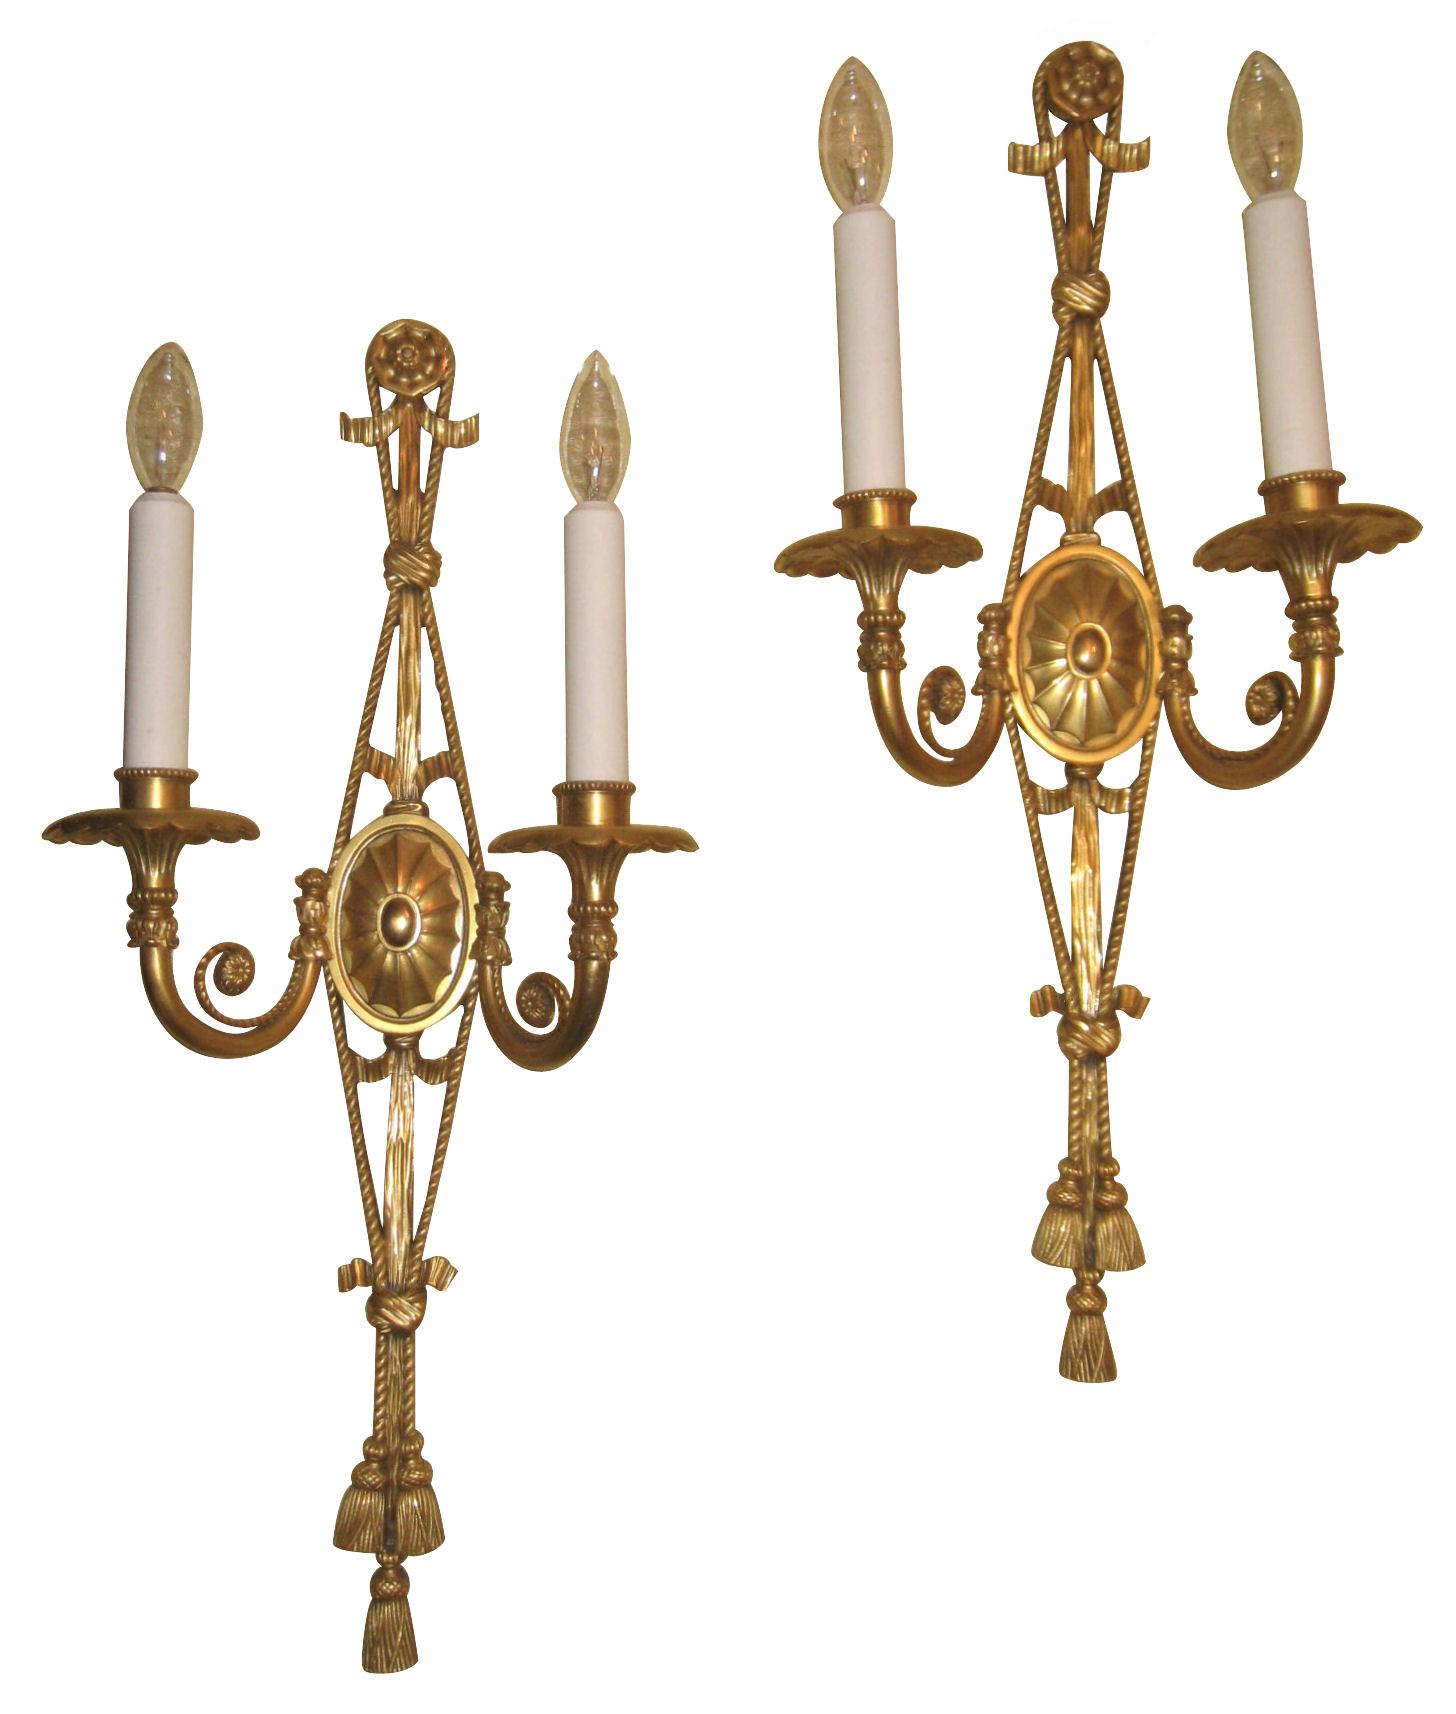 Pair of Adam style gilt bronze two-arm wall light sconces
Stock Number: L217